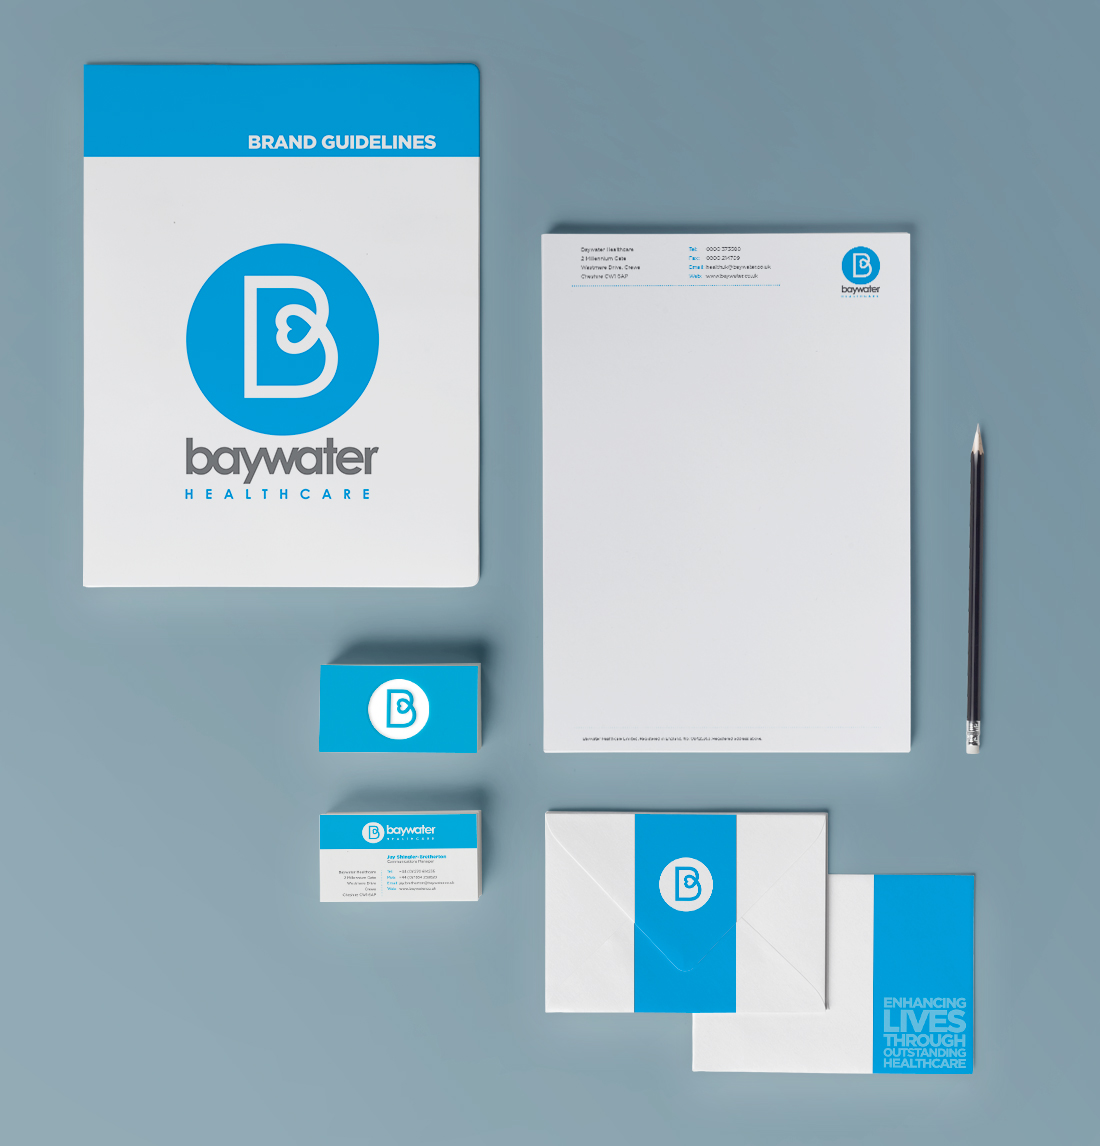 Baywater healthcare rebrand guidelines